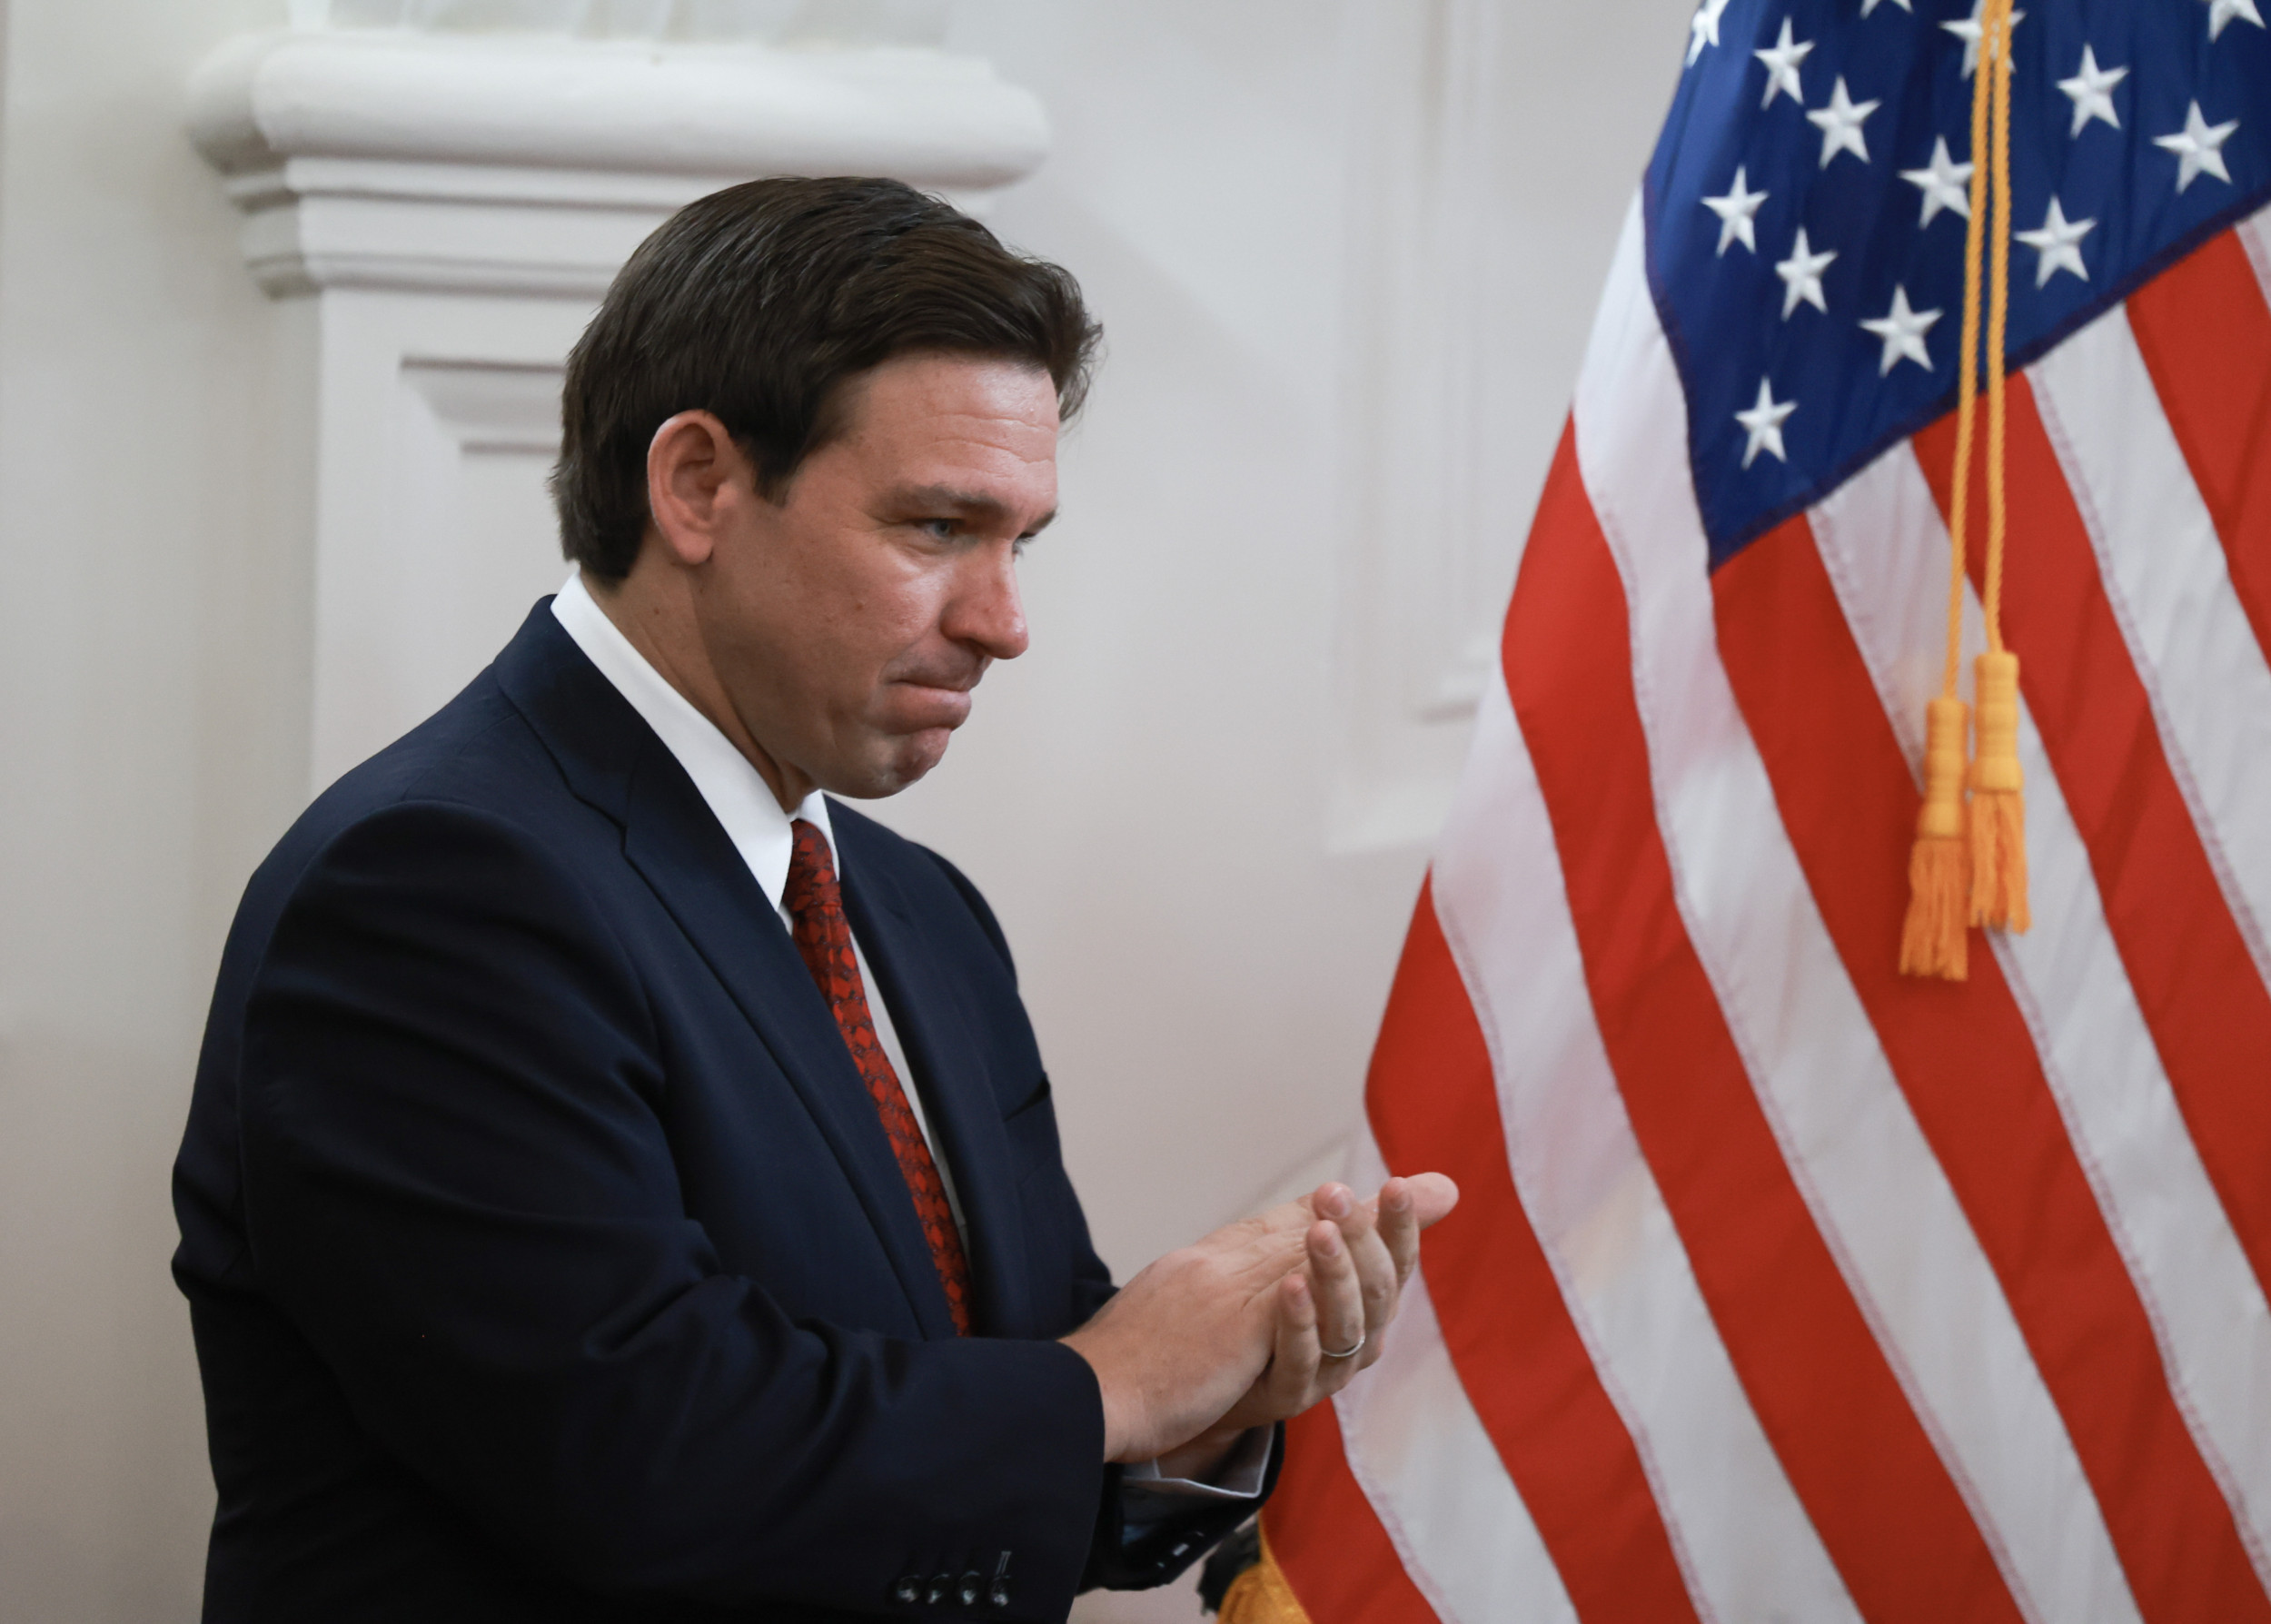 Florida Republican says Ron DeSantis lost a “lot of support” in state